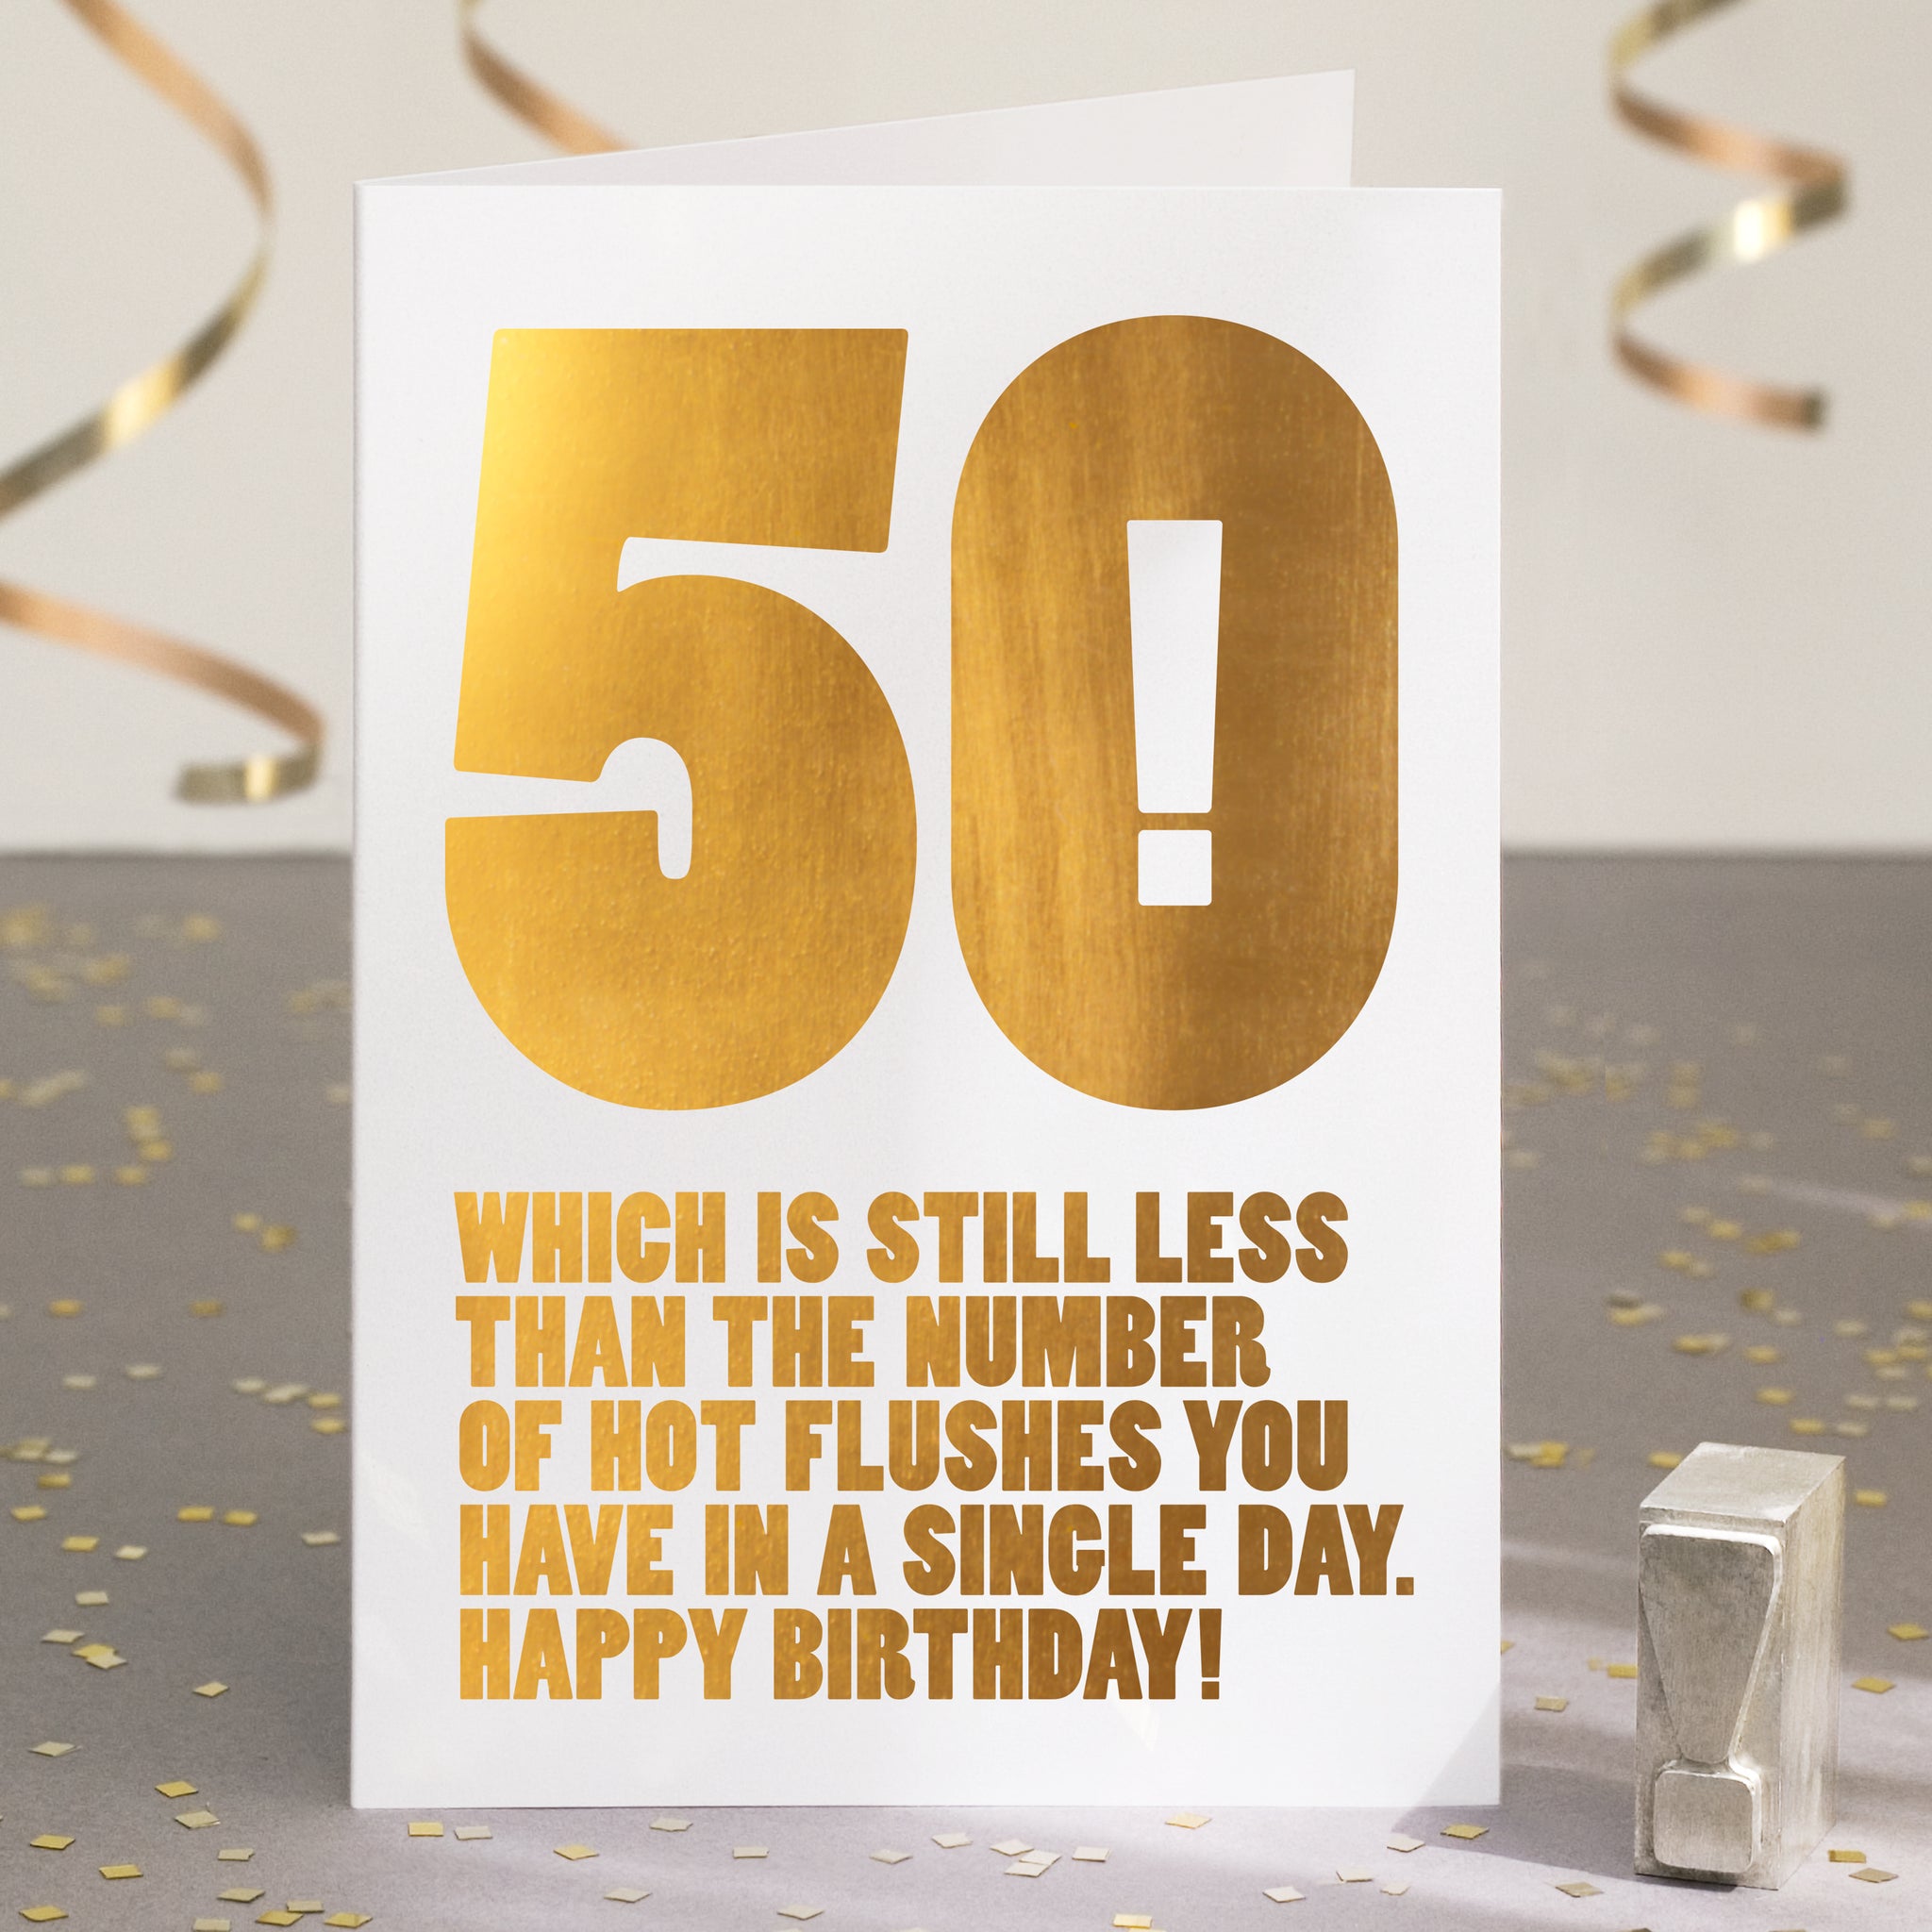 A funny 50th birthday card with the text '50, which is still less than the number of hot flushes you have in a single day'.